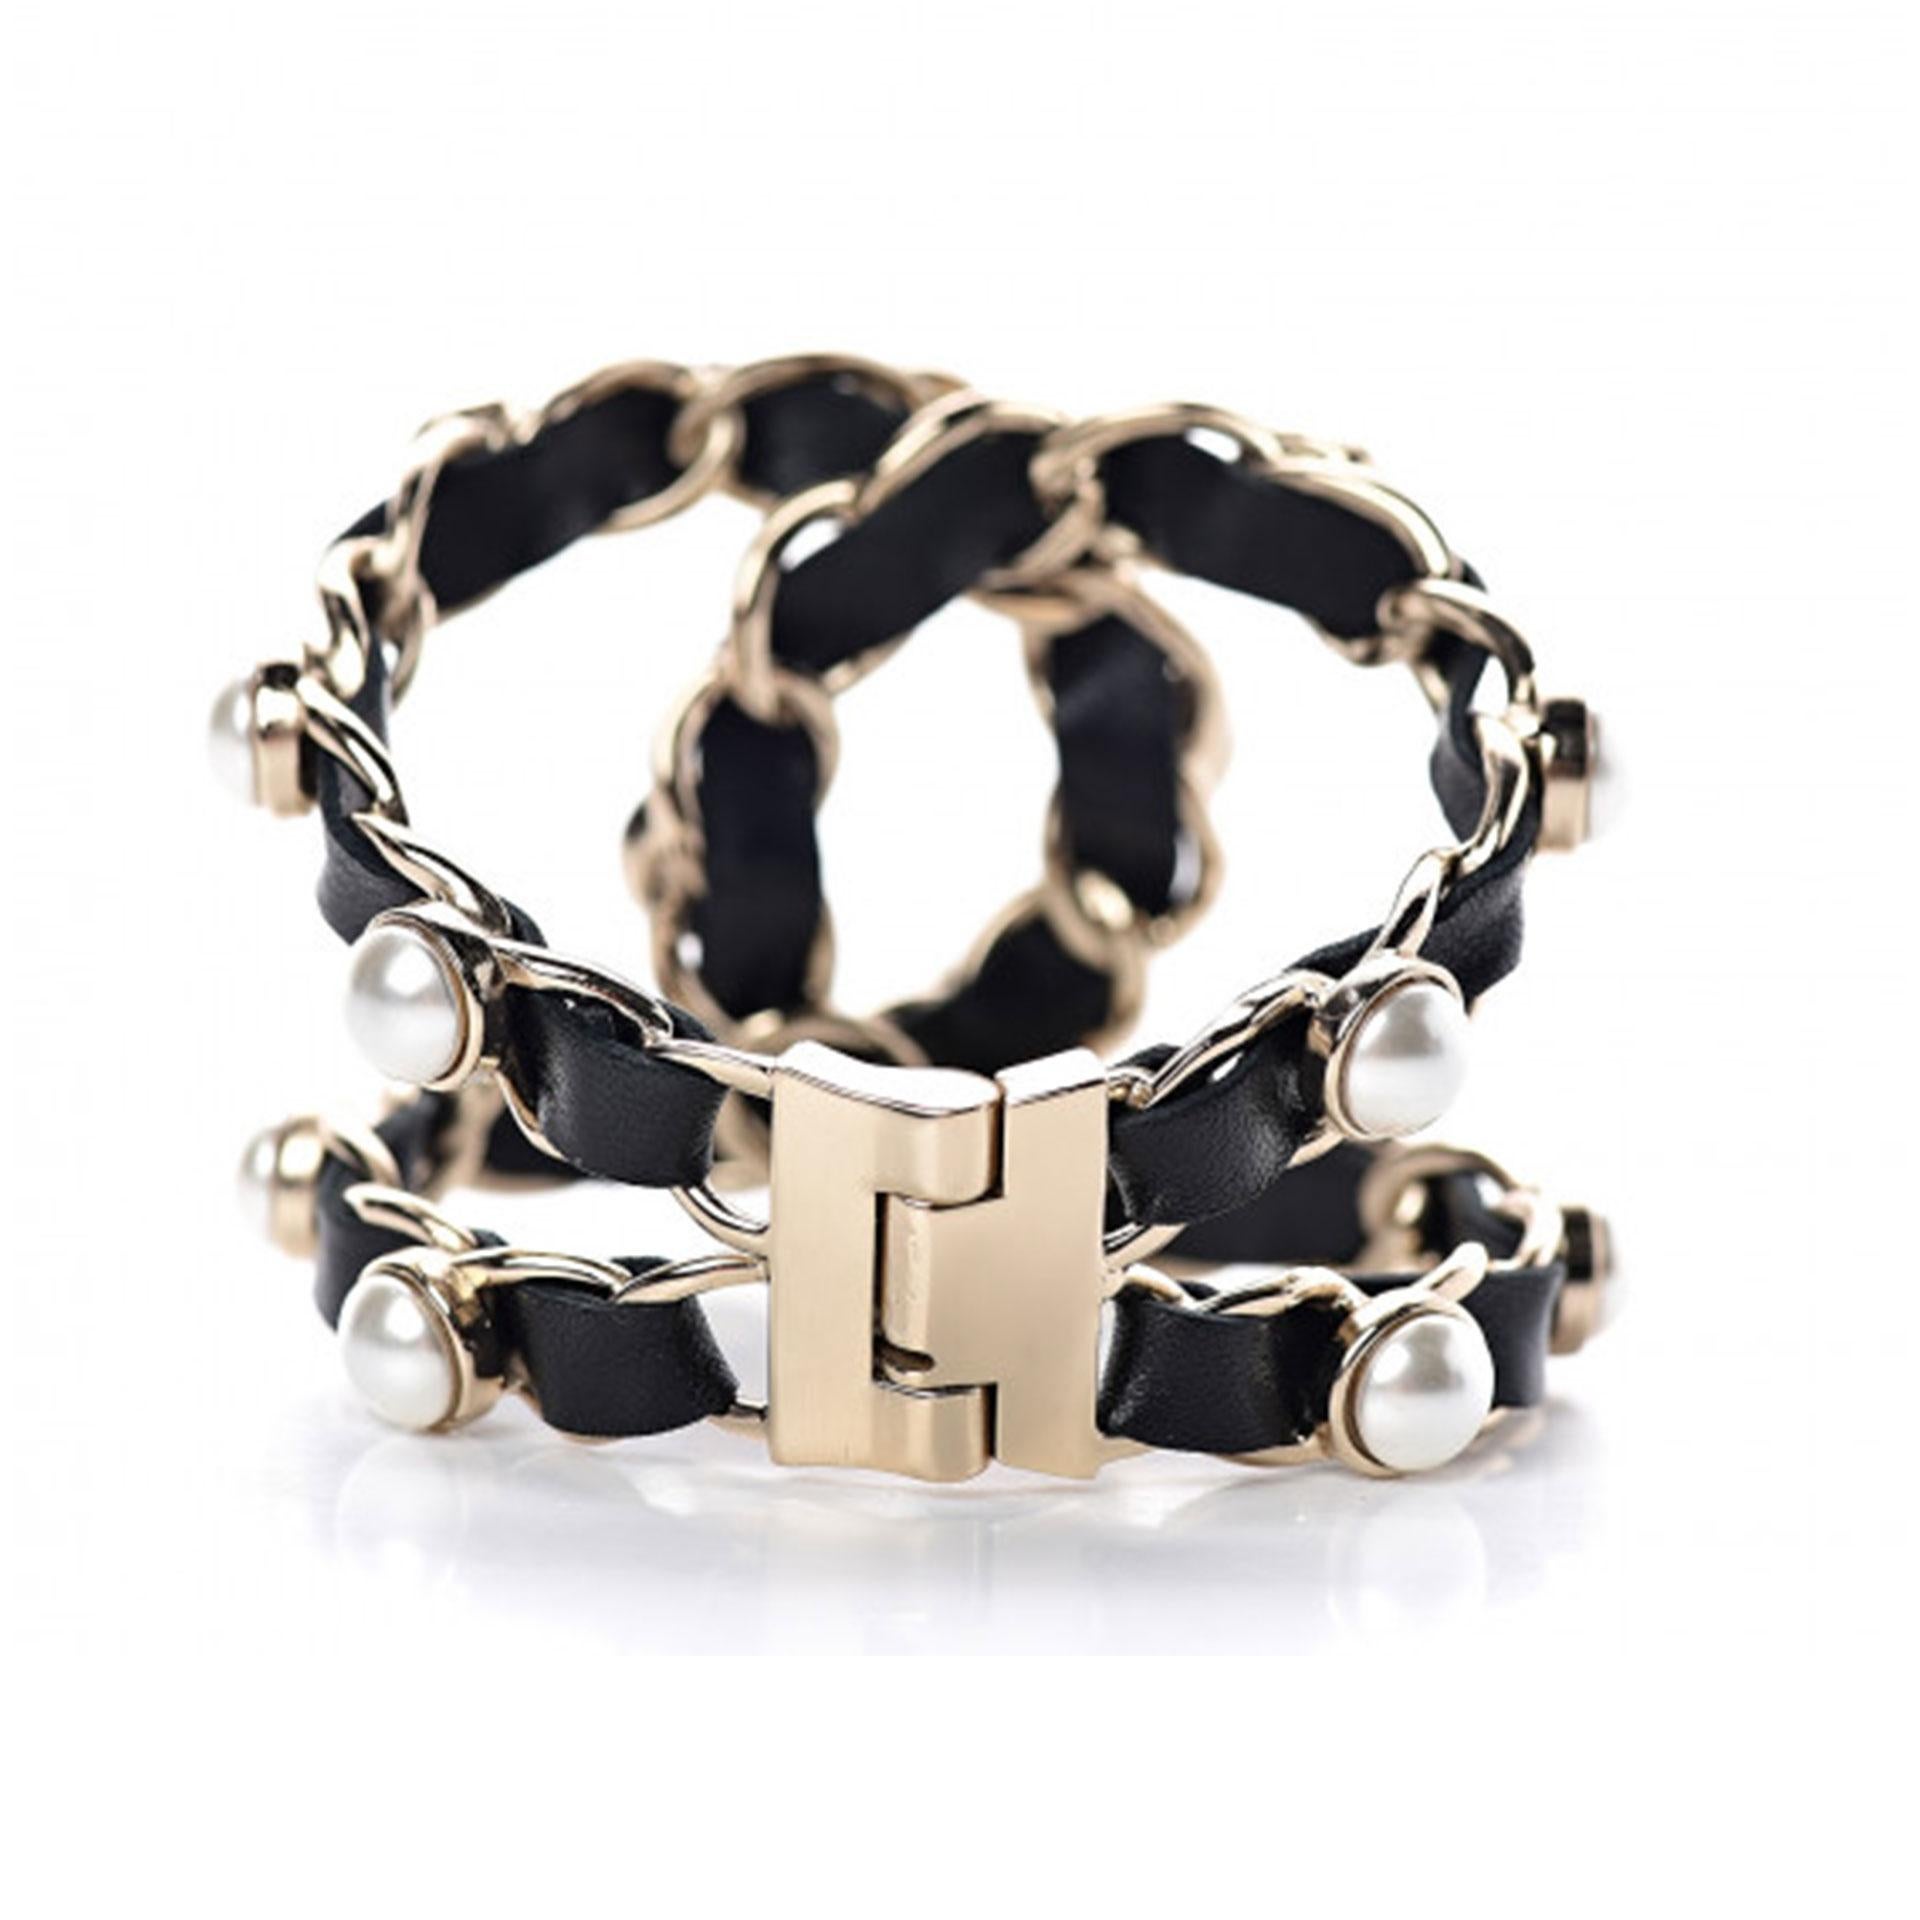 Chanel Soldout Black Lambskin Pearl Chain Gold Cuff Bracelet

This bold and gold tone cuff features faux pearls and black lambskin leather threaded through the chains to form a stunning Chanel CC logo when closed. This is an excellent cuff with the